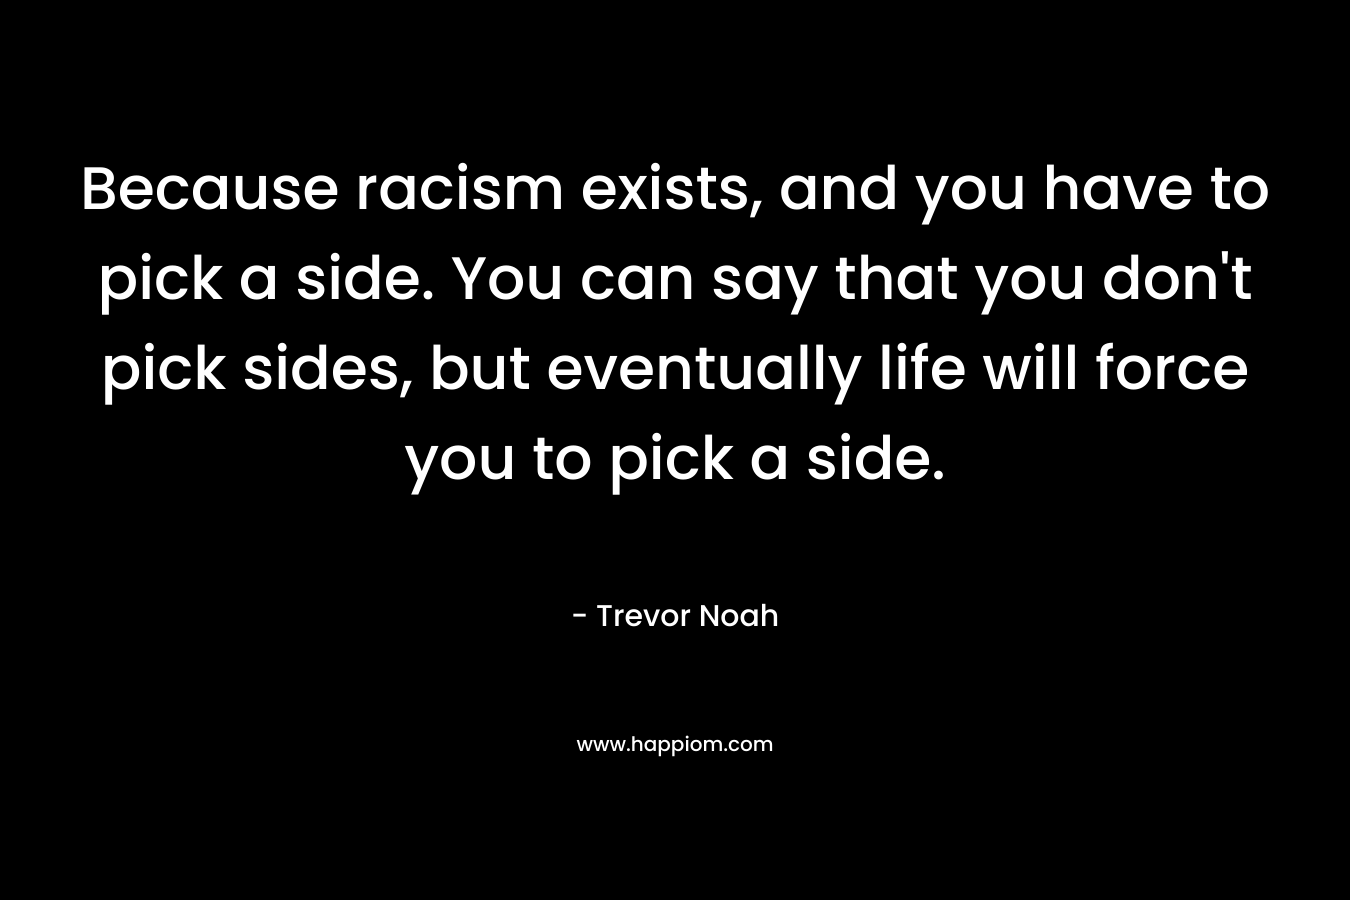 Because racism exists, and you have to pick a side. You can say that you don’t pick sides, but eventually life will force you to pick a side. – Trevor Noah